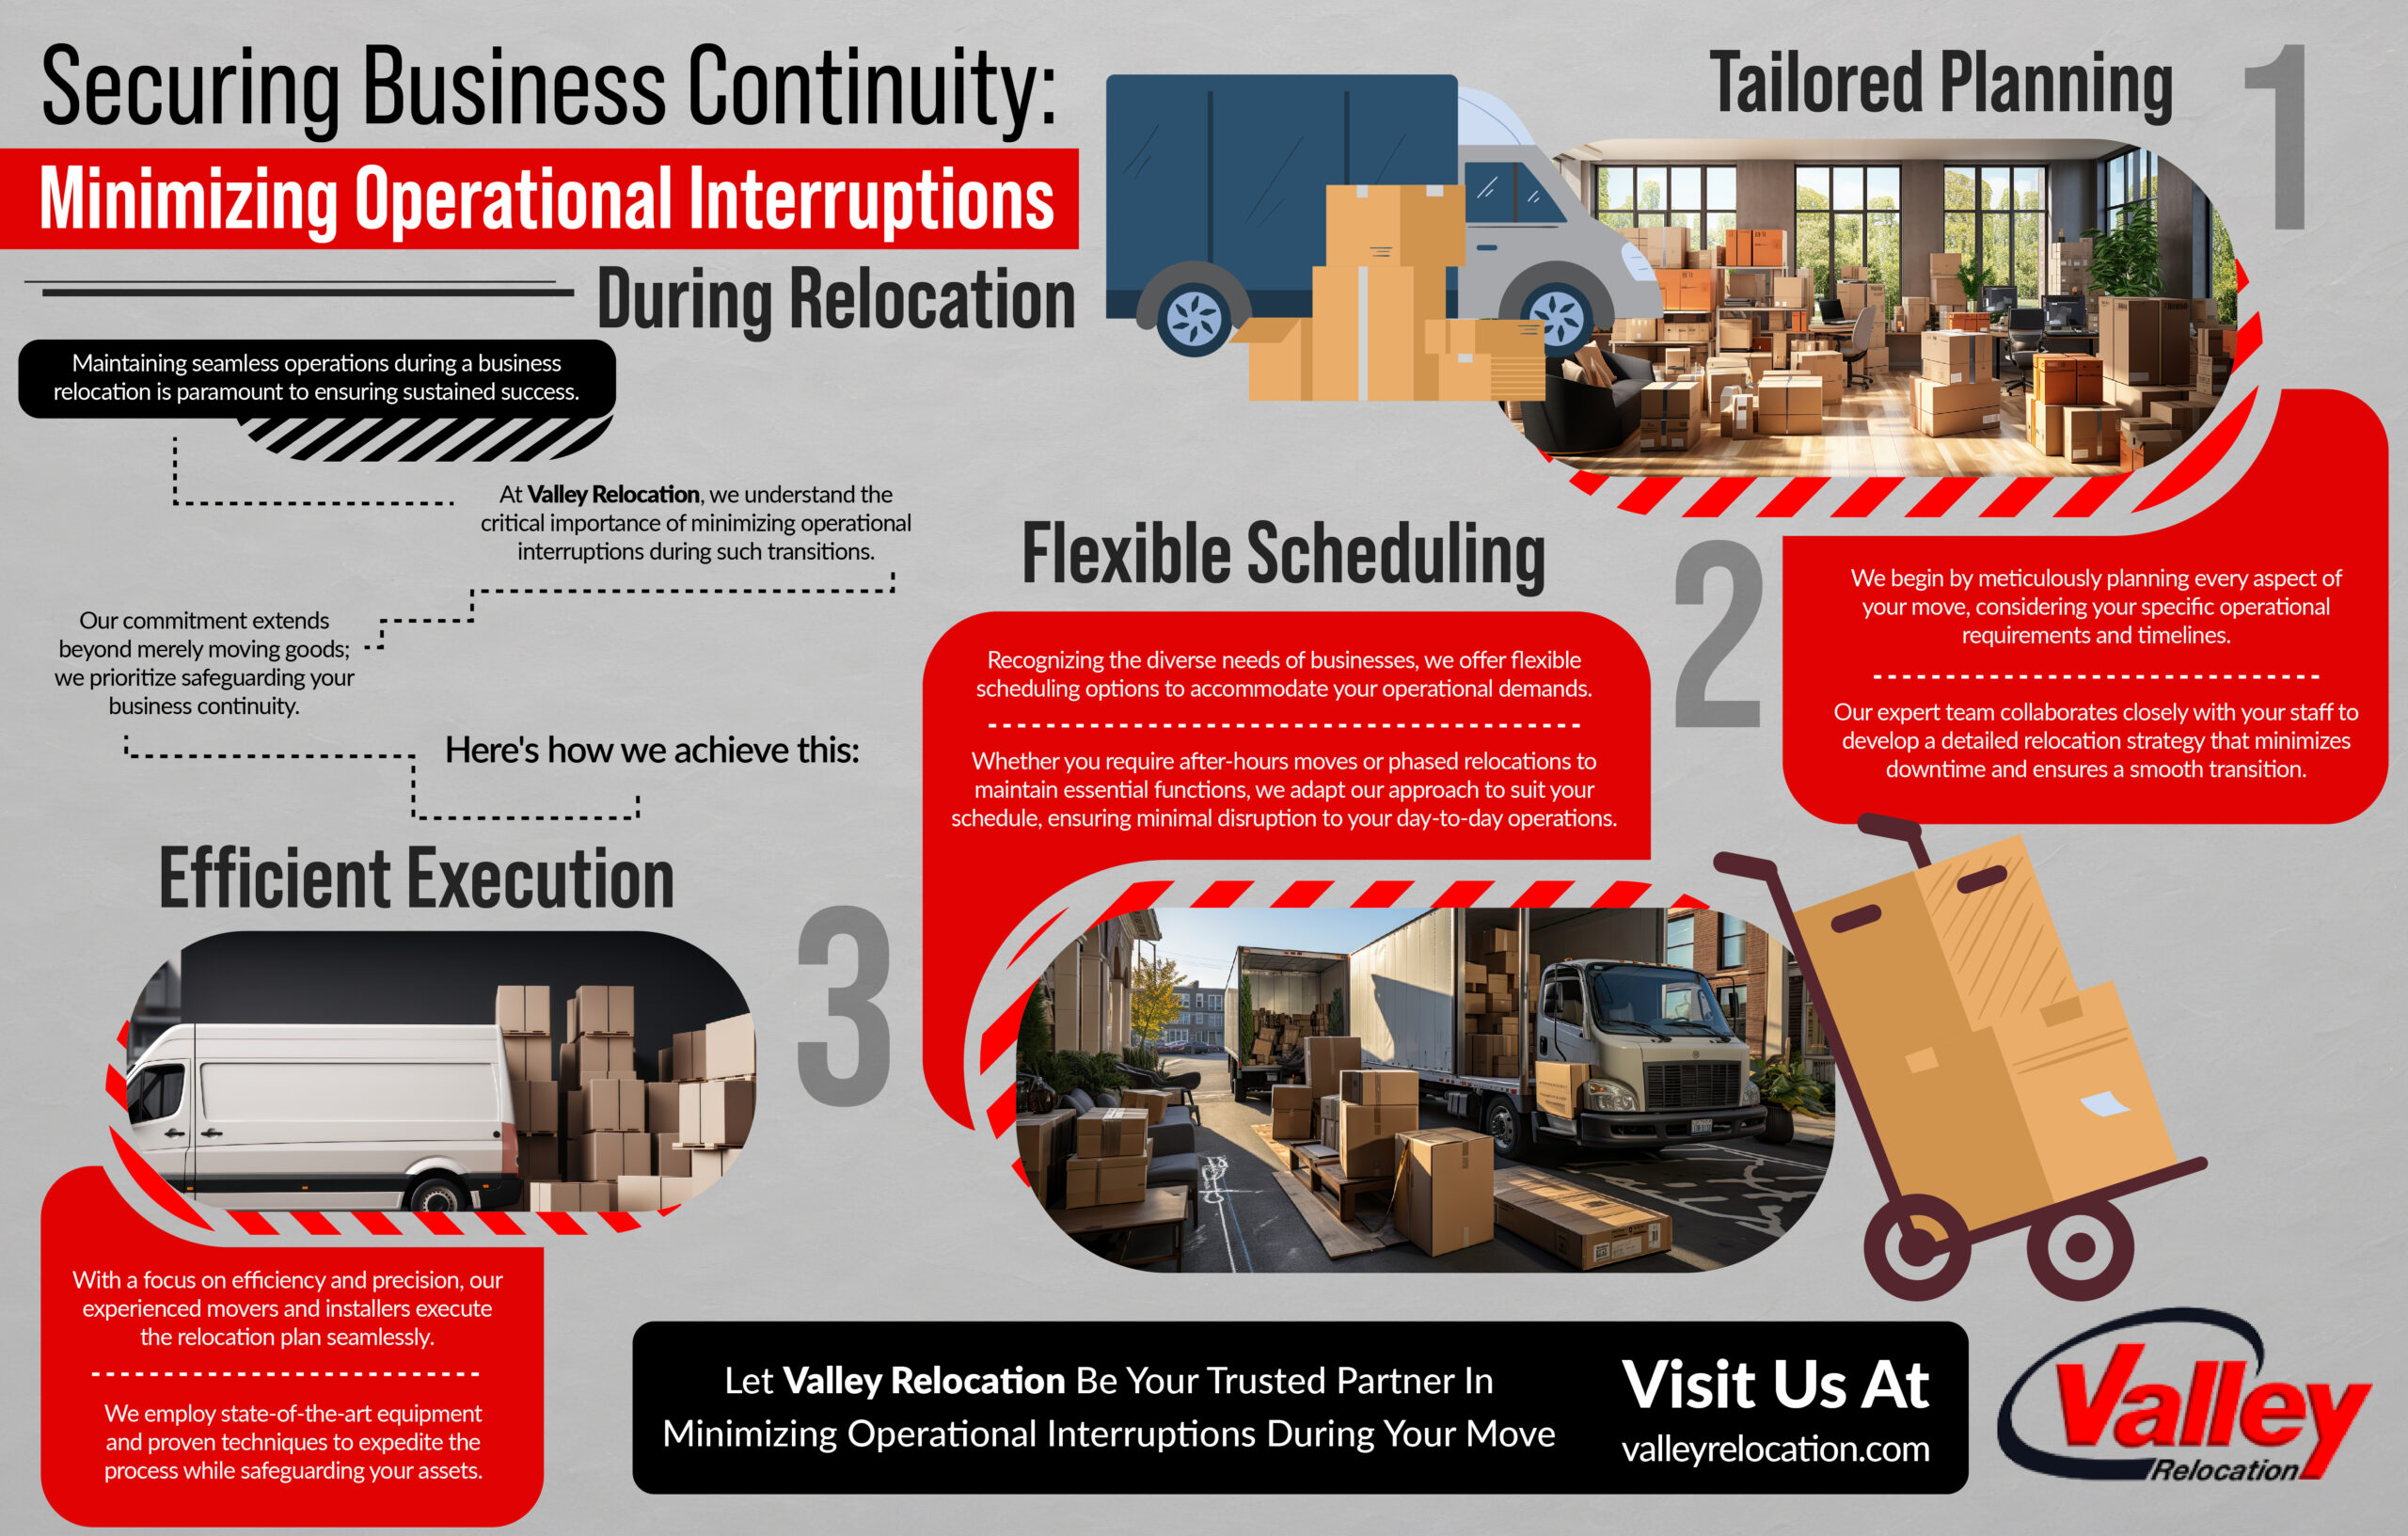 Securing Business Continuity: Minimizing Operational Interruptions During Relocation